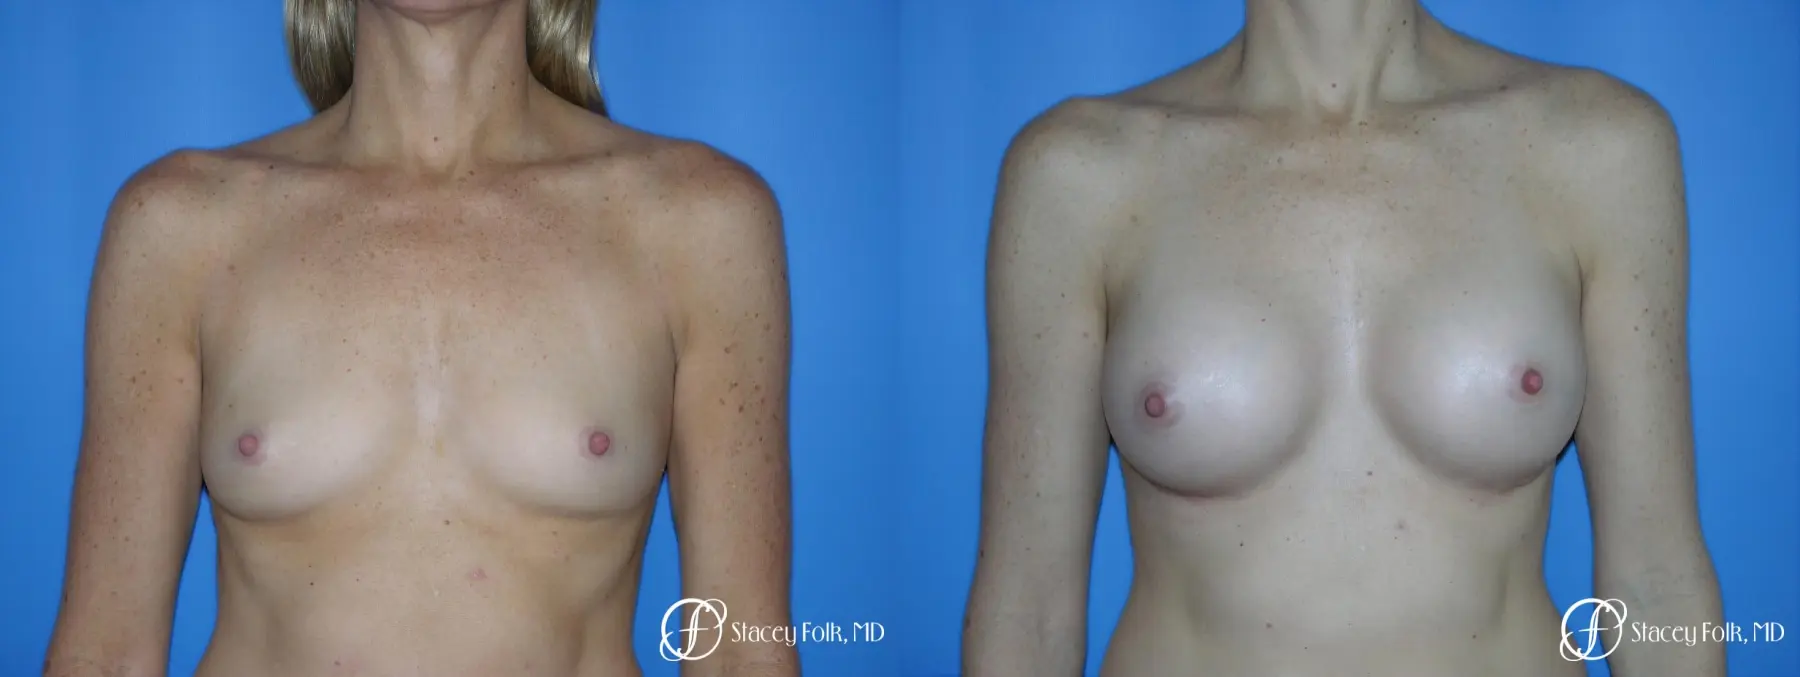 Denver Breast Augmentation 3633 - Before and After